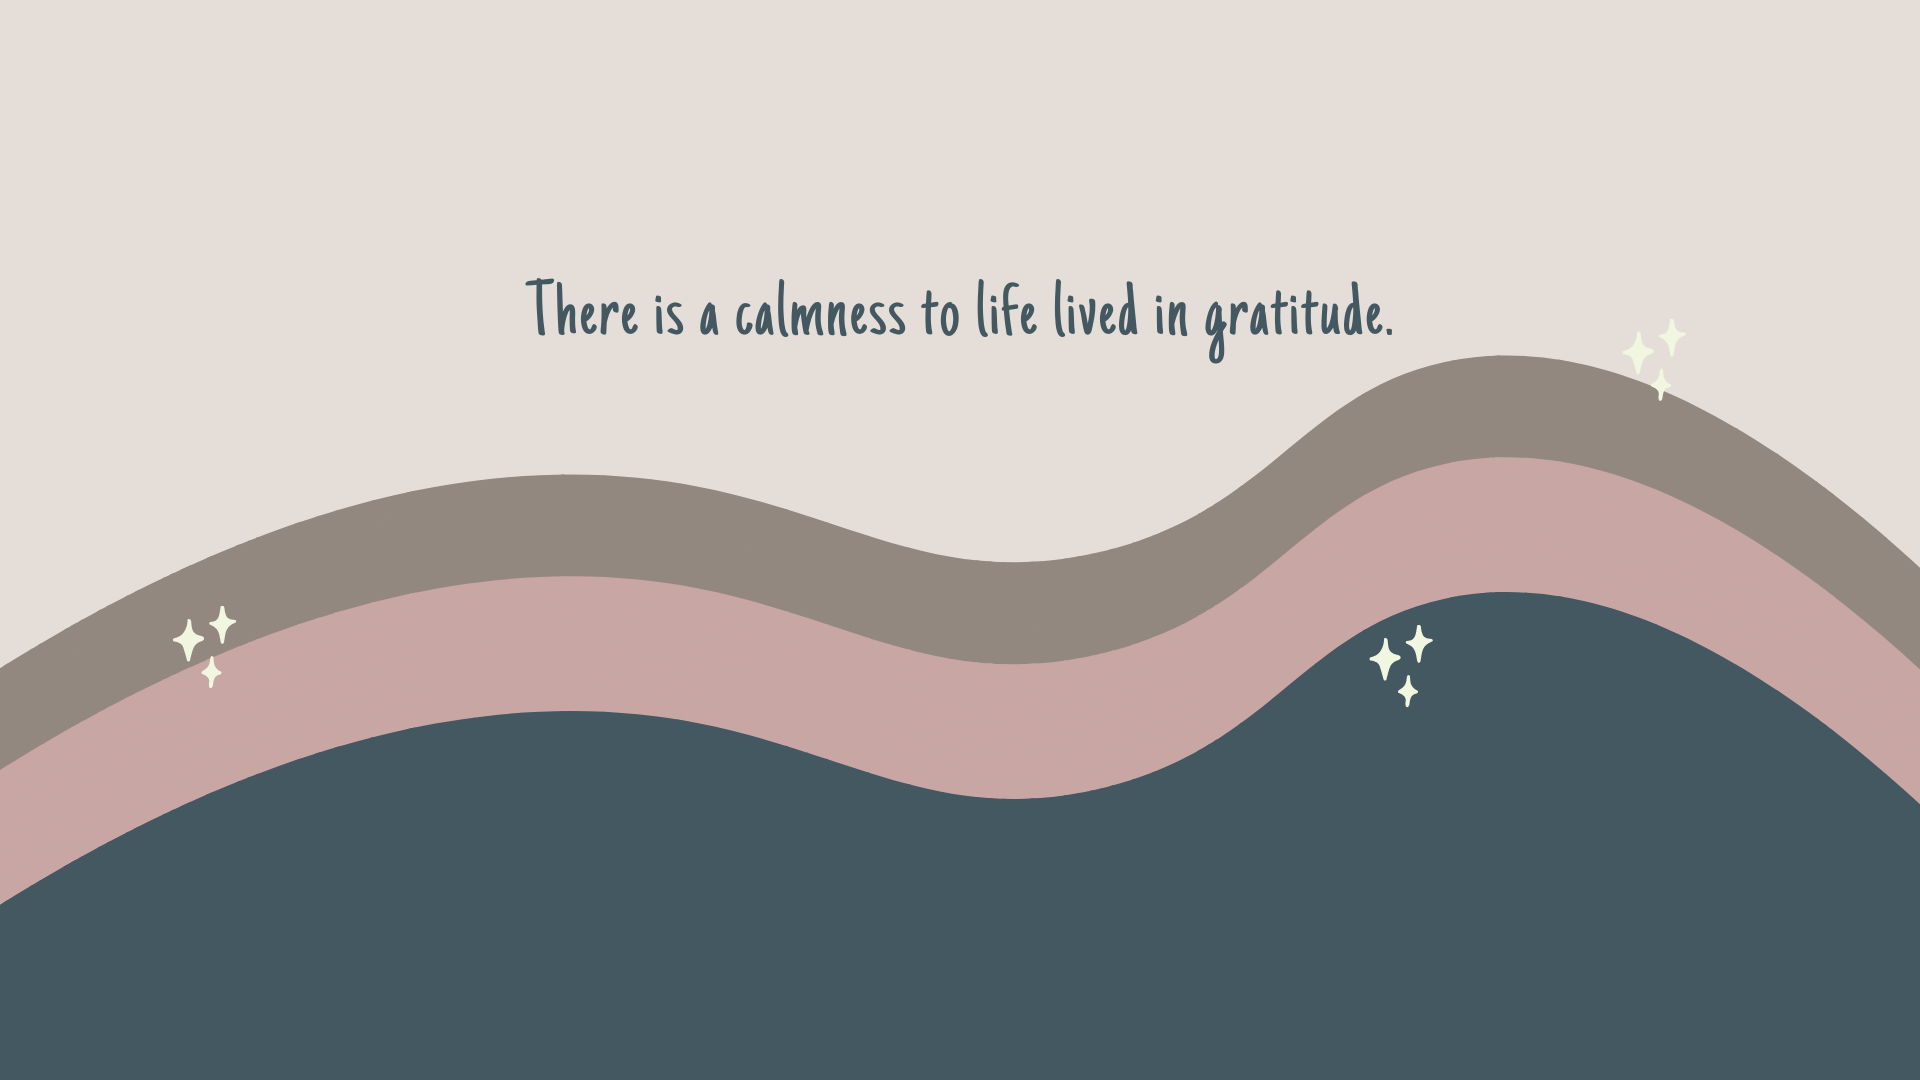 There is calmness to life lived in gratitude